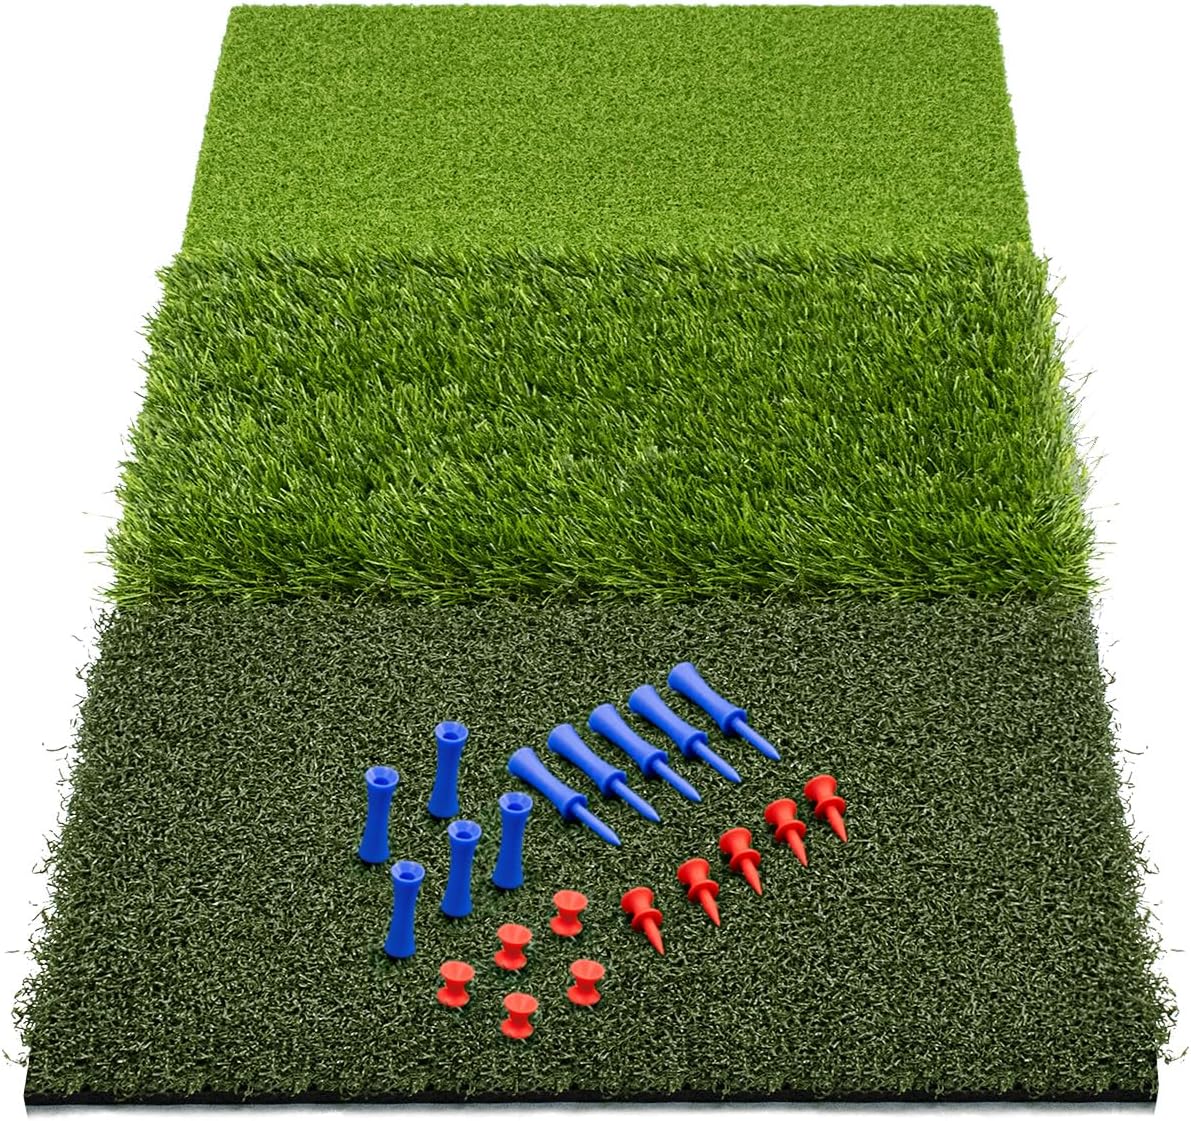 SAPLIZE Large Golf Mat (Four Portable Golf Practice Grass Mats for Indoor and Outdoor Anti-deformation)